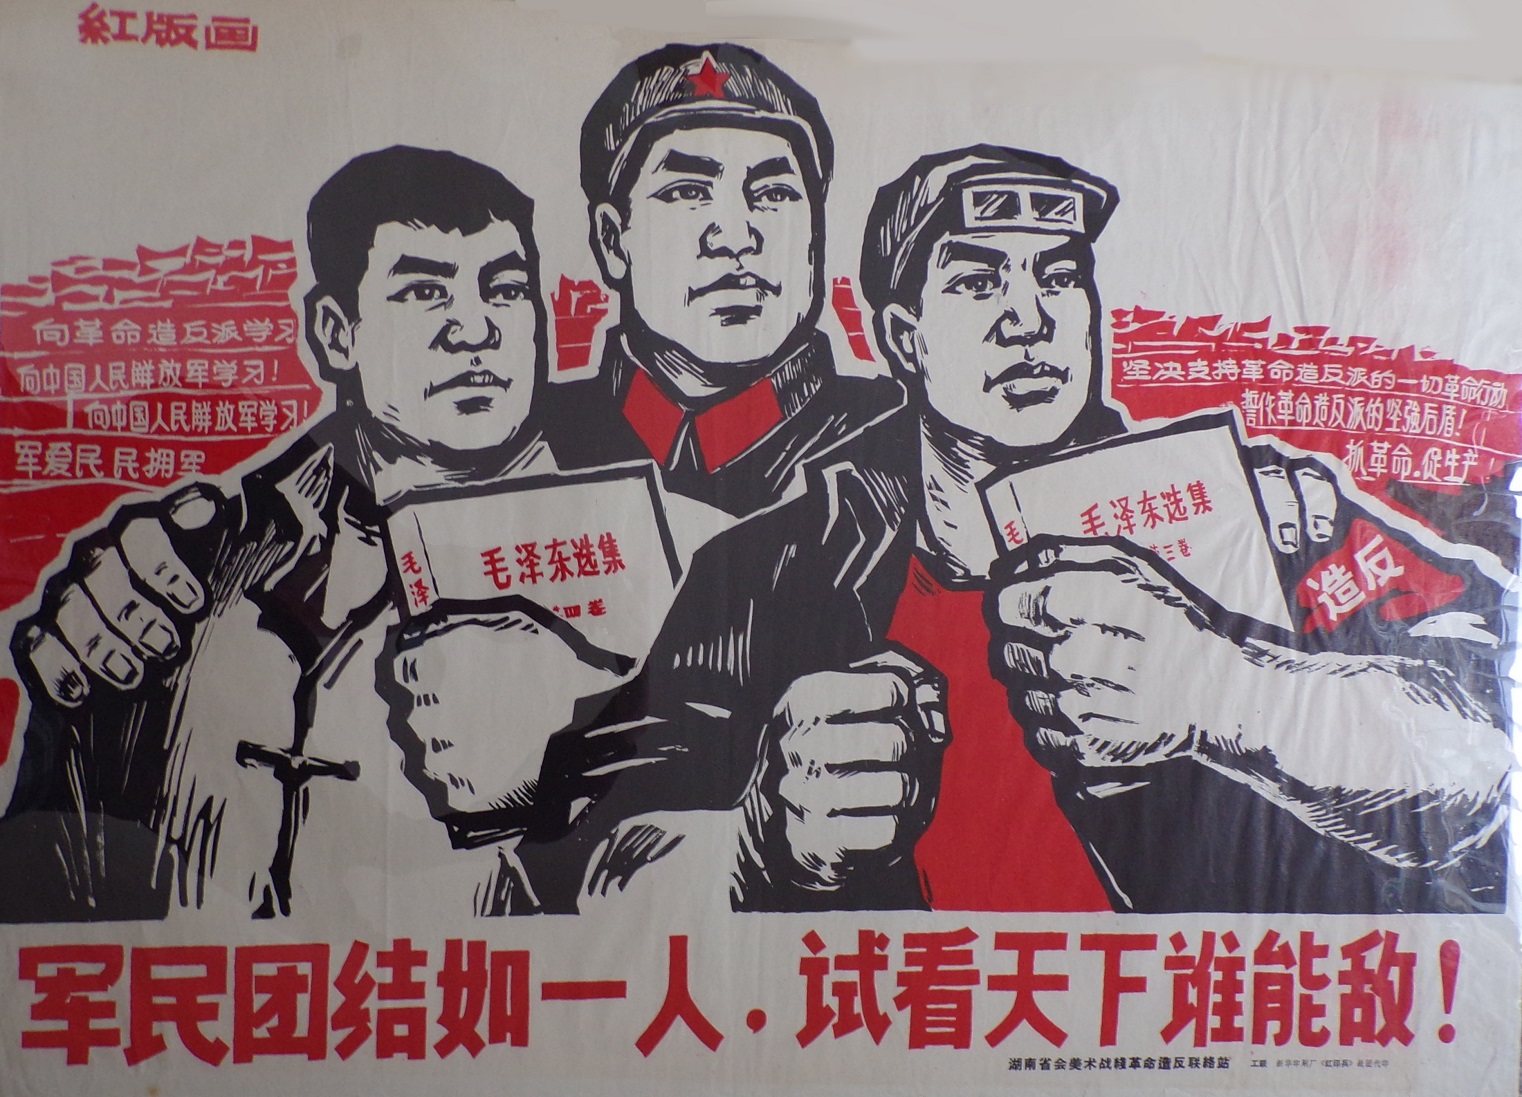 Soldiers and Citizens Unite As One; See Who Under Heaven Can Defeat Us! 军民如一人，试看天下谁能敌！